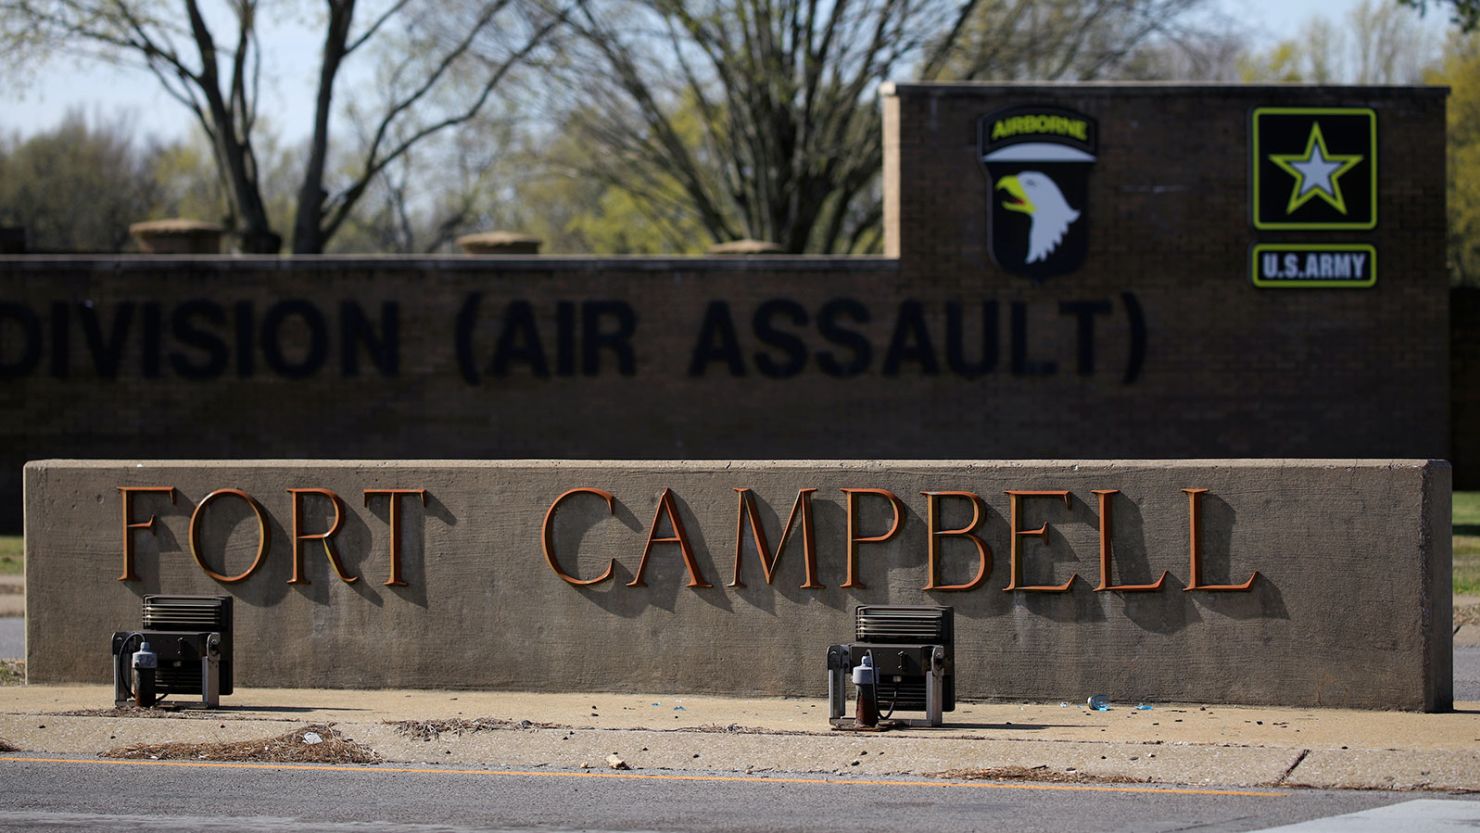 231108130306 Fort Campbell Ky File ?c=16x9&q=h 833,w 1480,c Fill